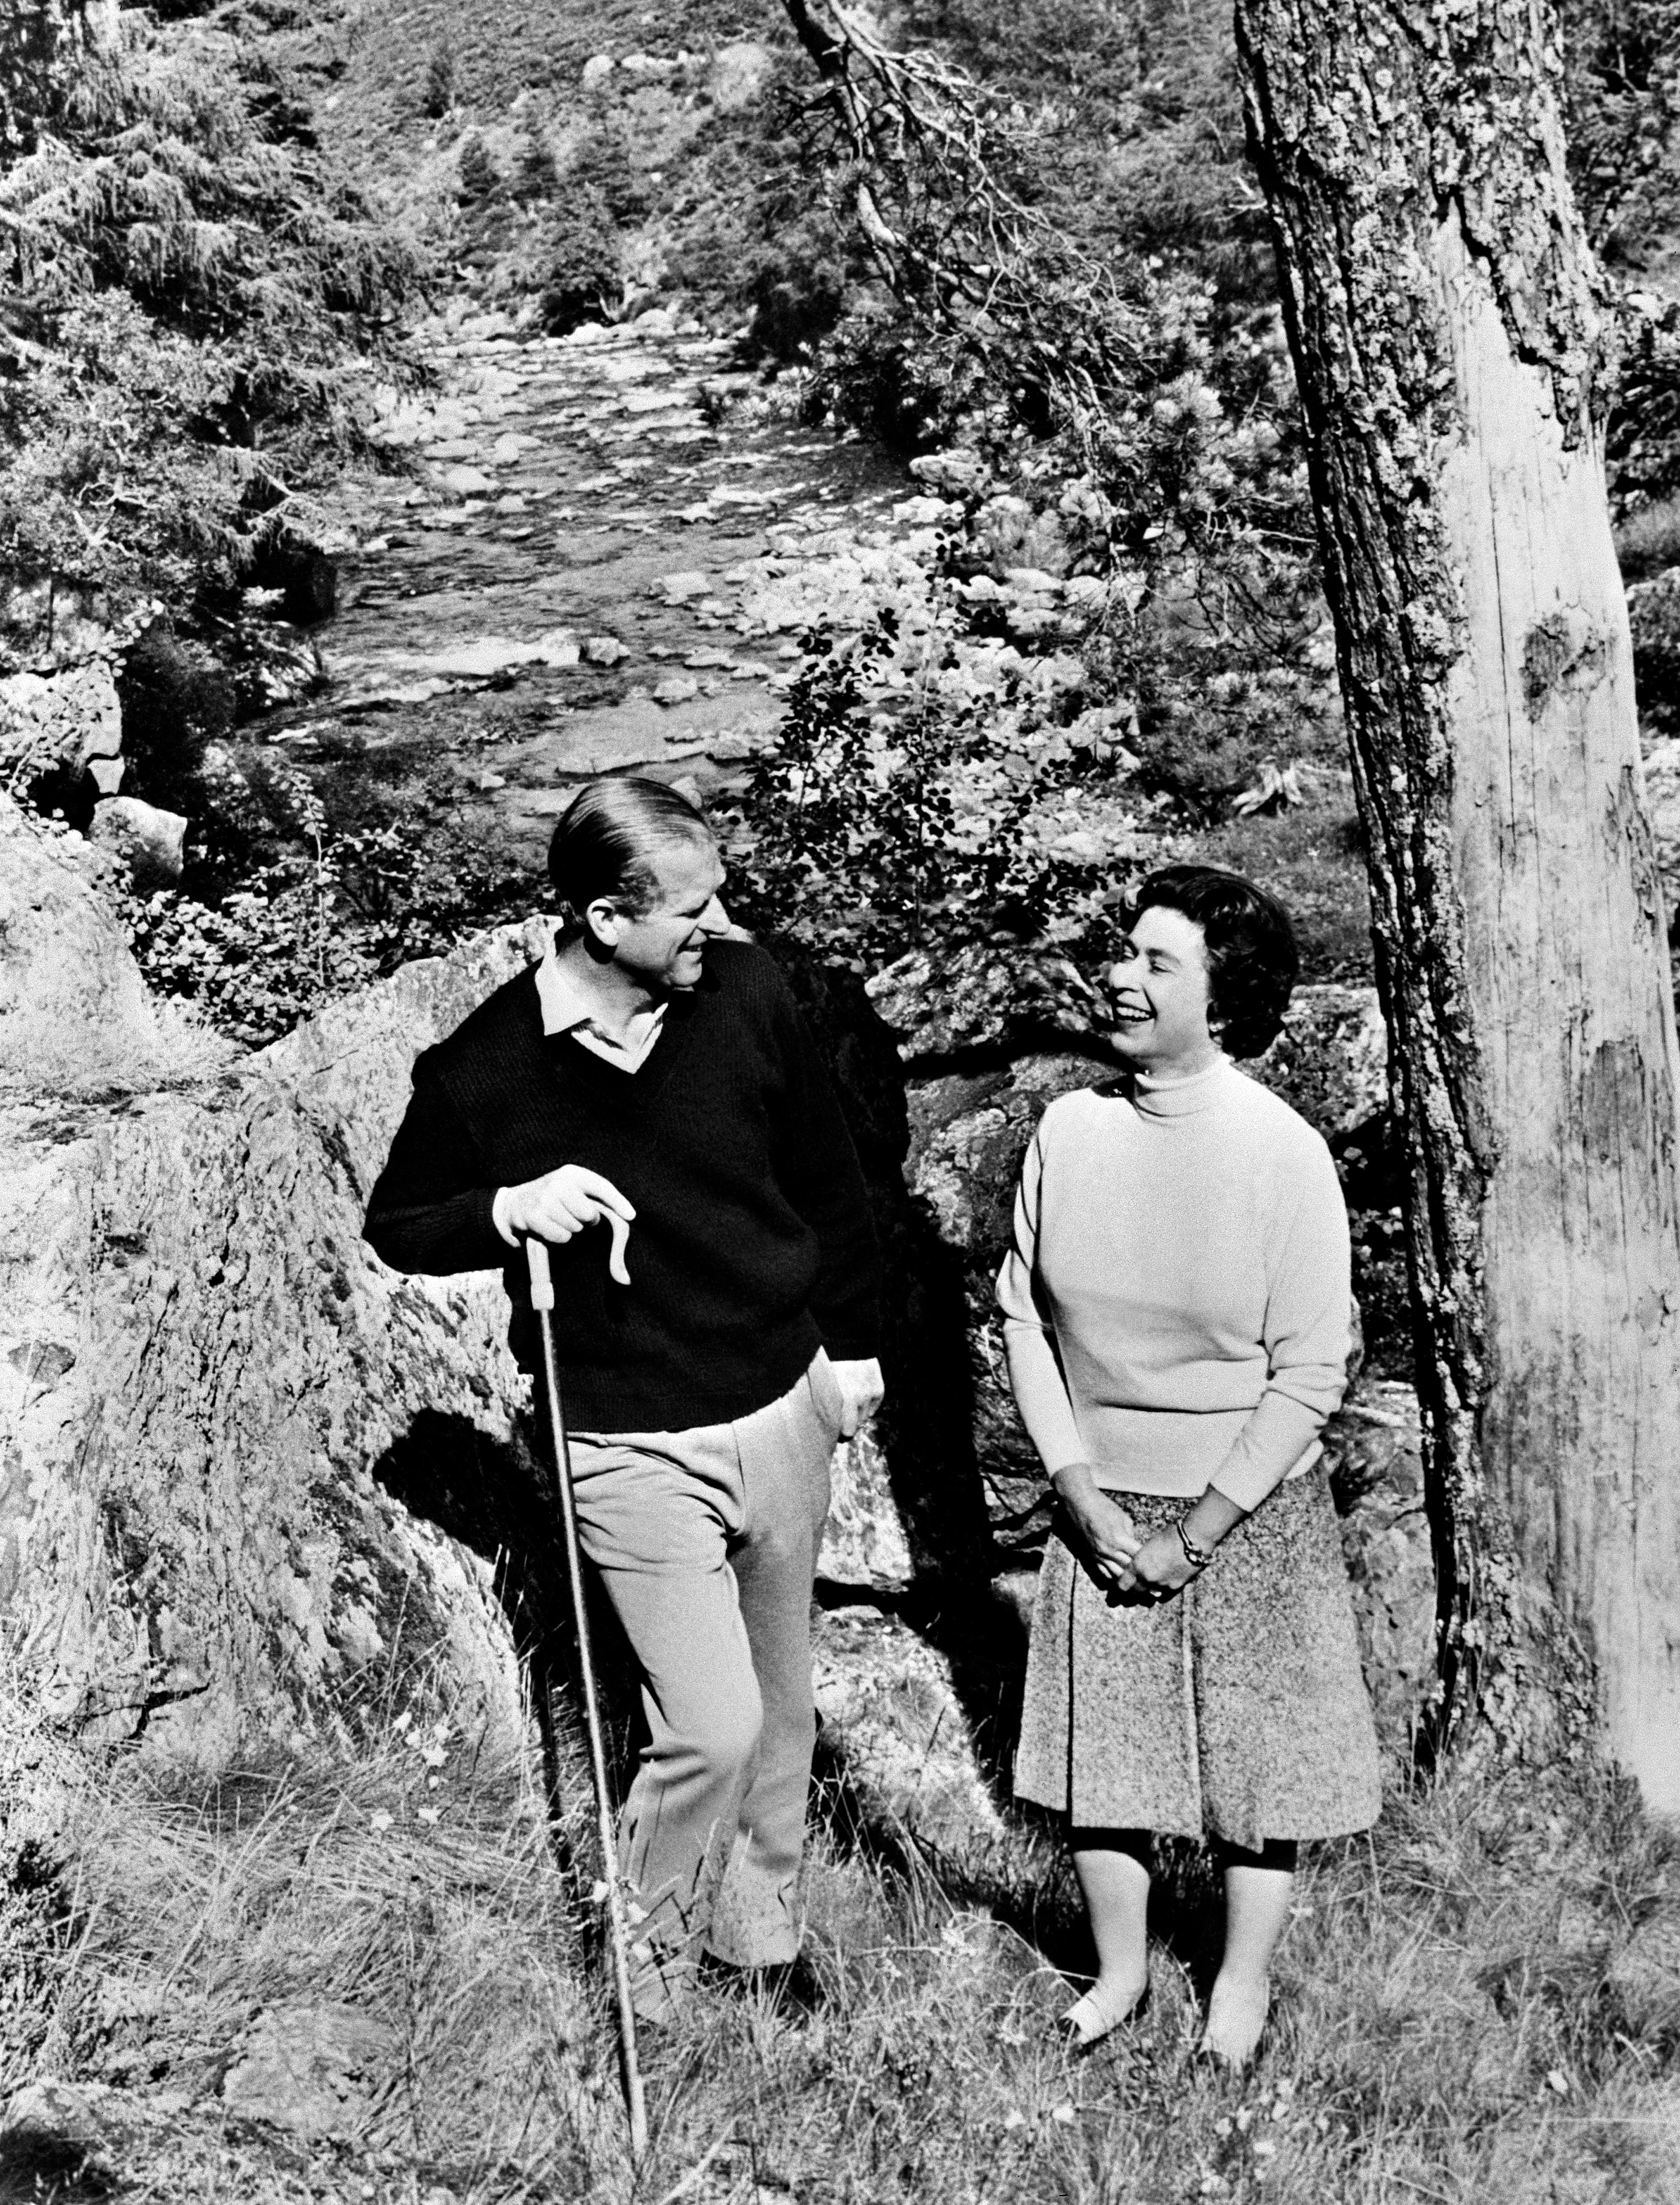 Queen Elizabeth II and Prince Philip, Duke of Edinburgh, pose at Balmoral Castle, near the village of Crathie in Aberdeenshire, 1972